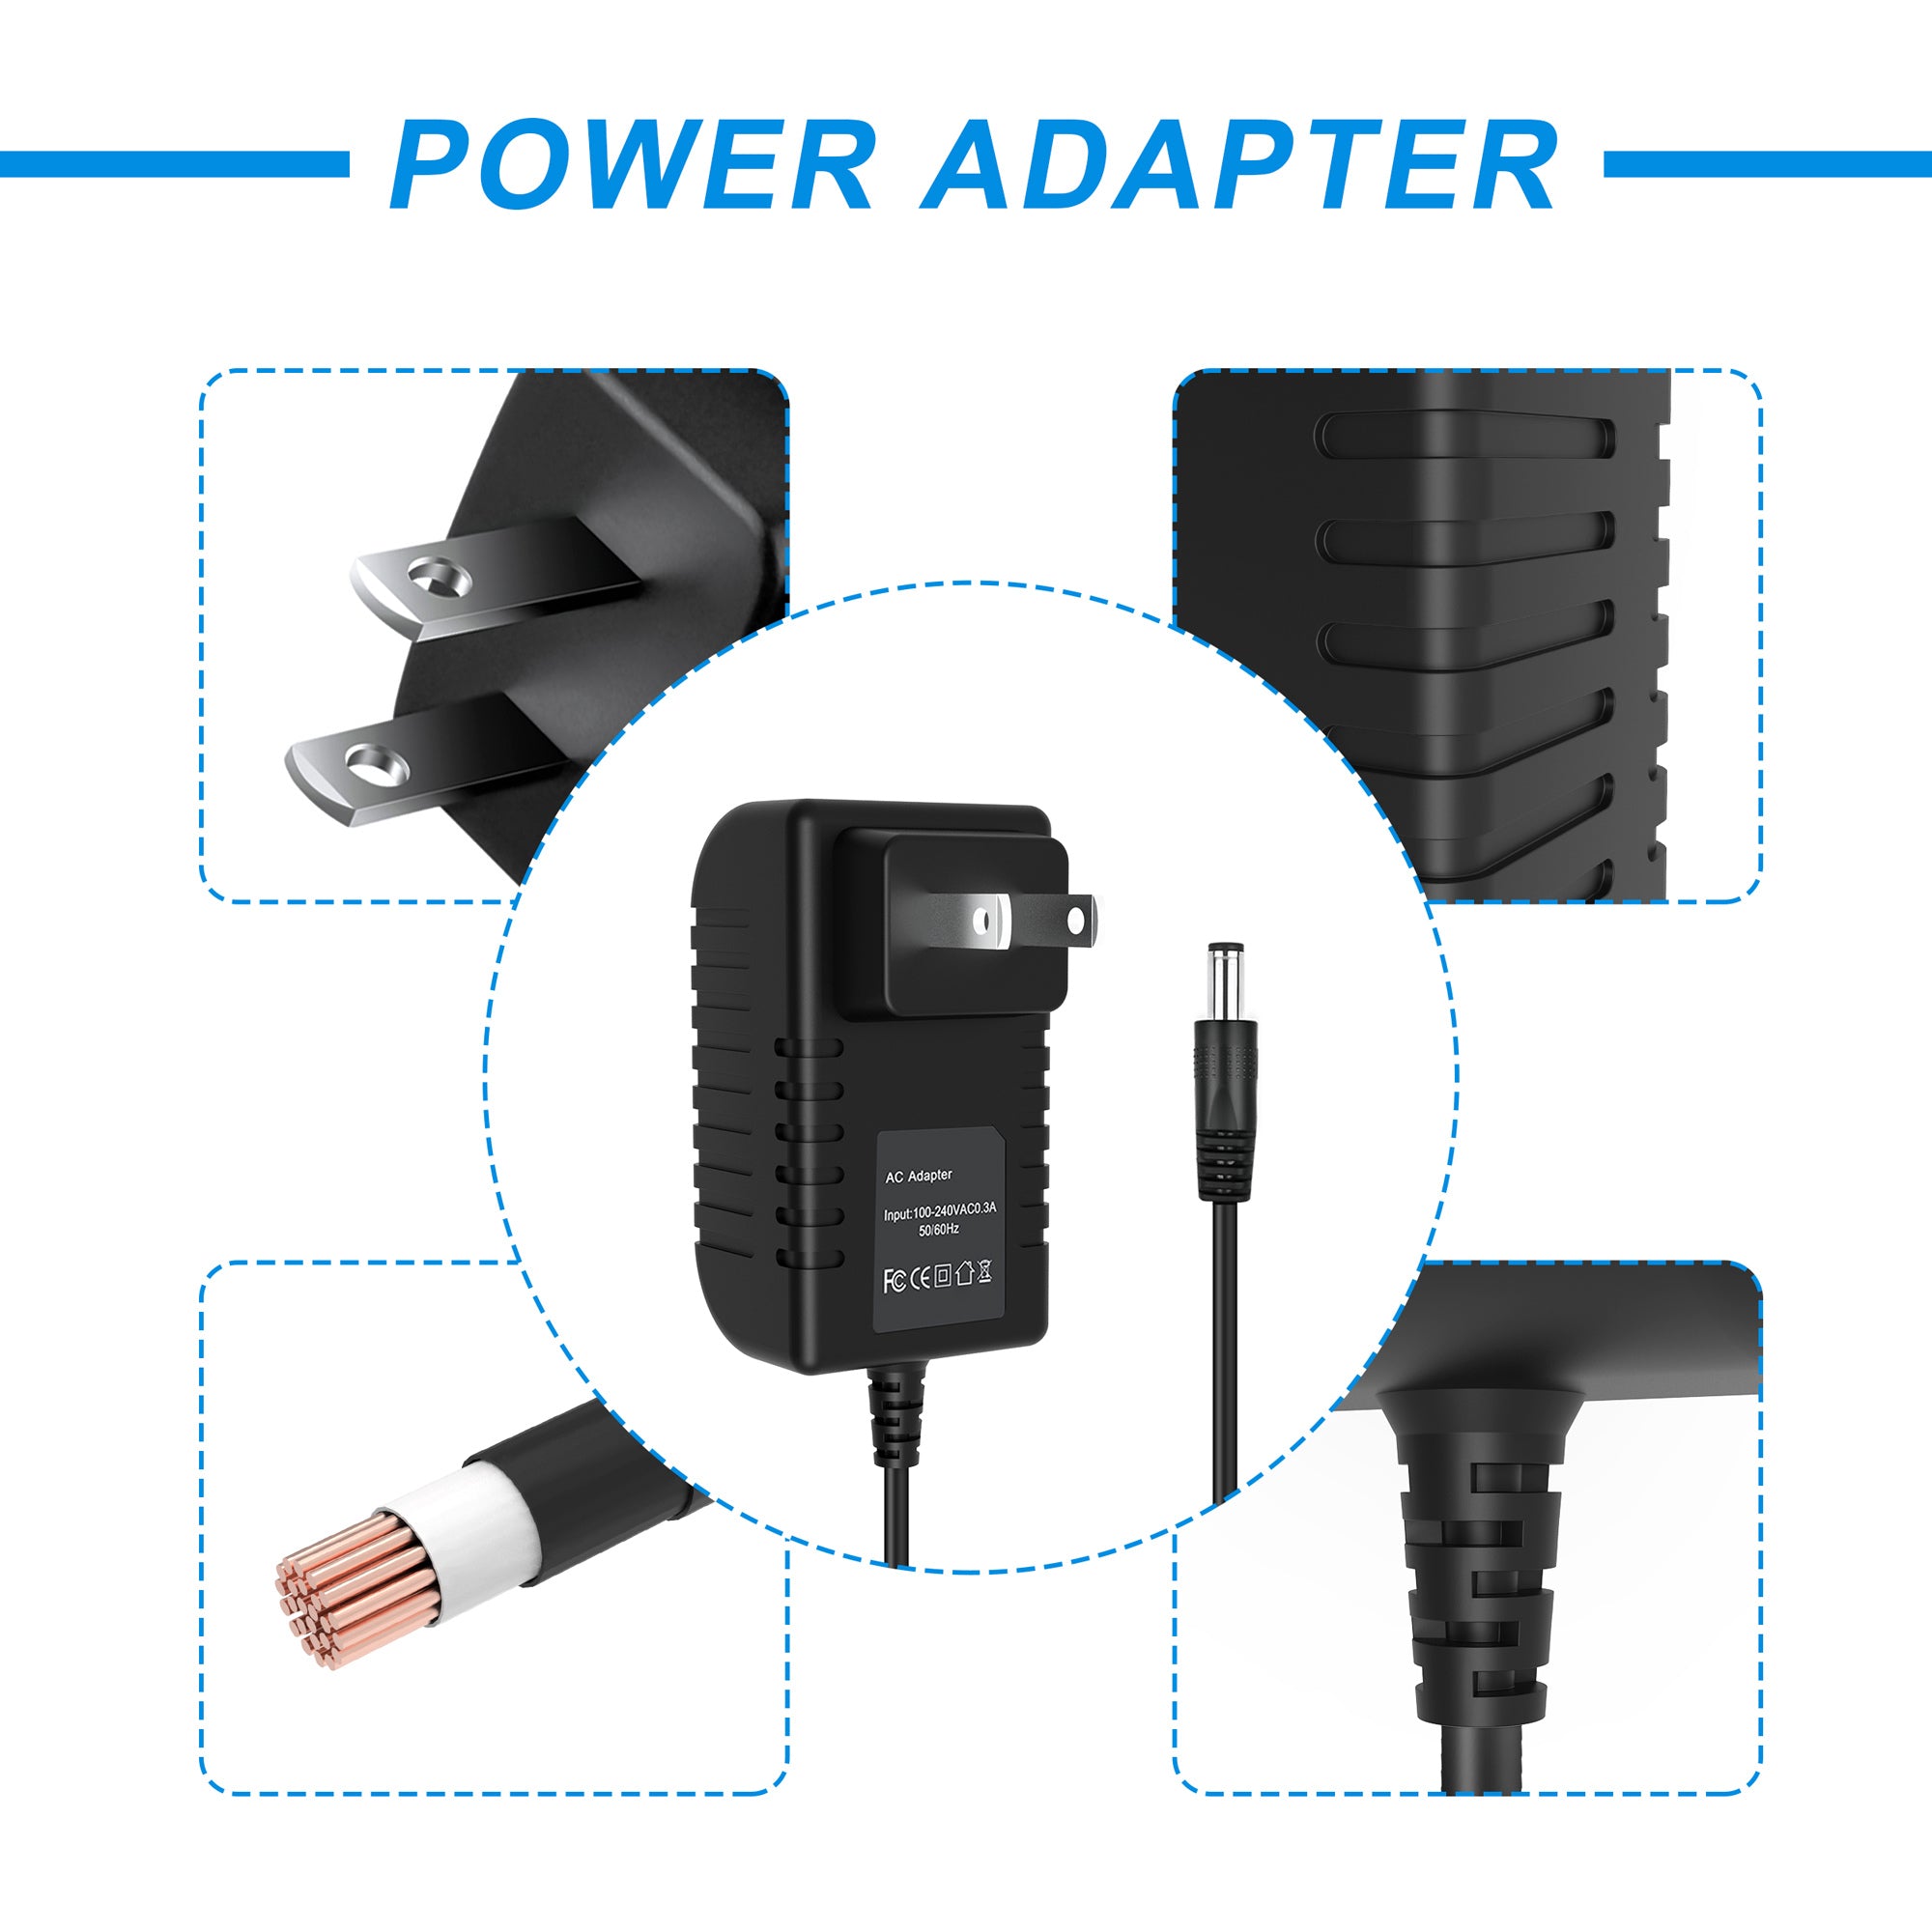 AbleGrid AC/DC Adapter Compatible with Sony LMD-440 LMD-720W LMD-530 LMD-7220W Video Digital LCD monitor Power Supply Cord Cable PS Wall Home Charger Input: 100 - 240 VAC Worldwide Use Mains PSU